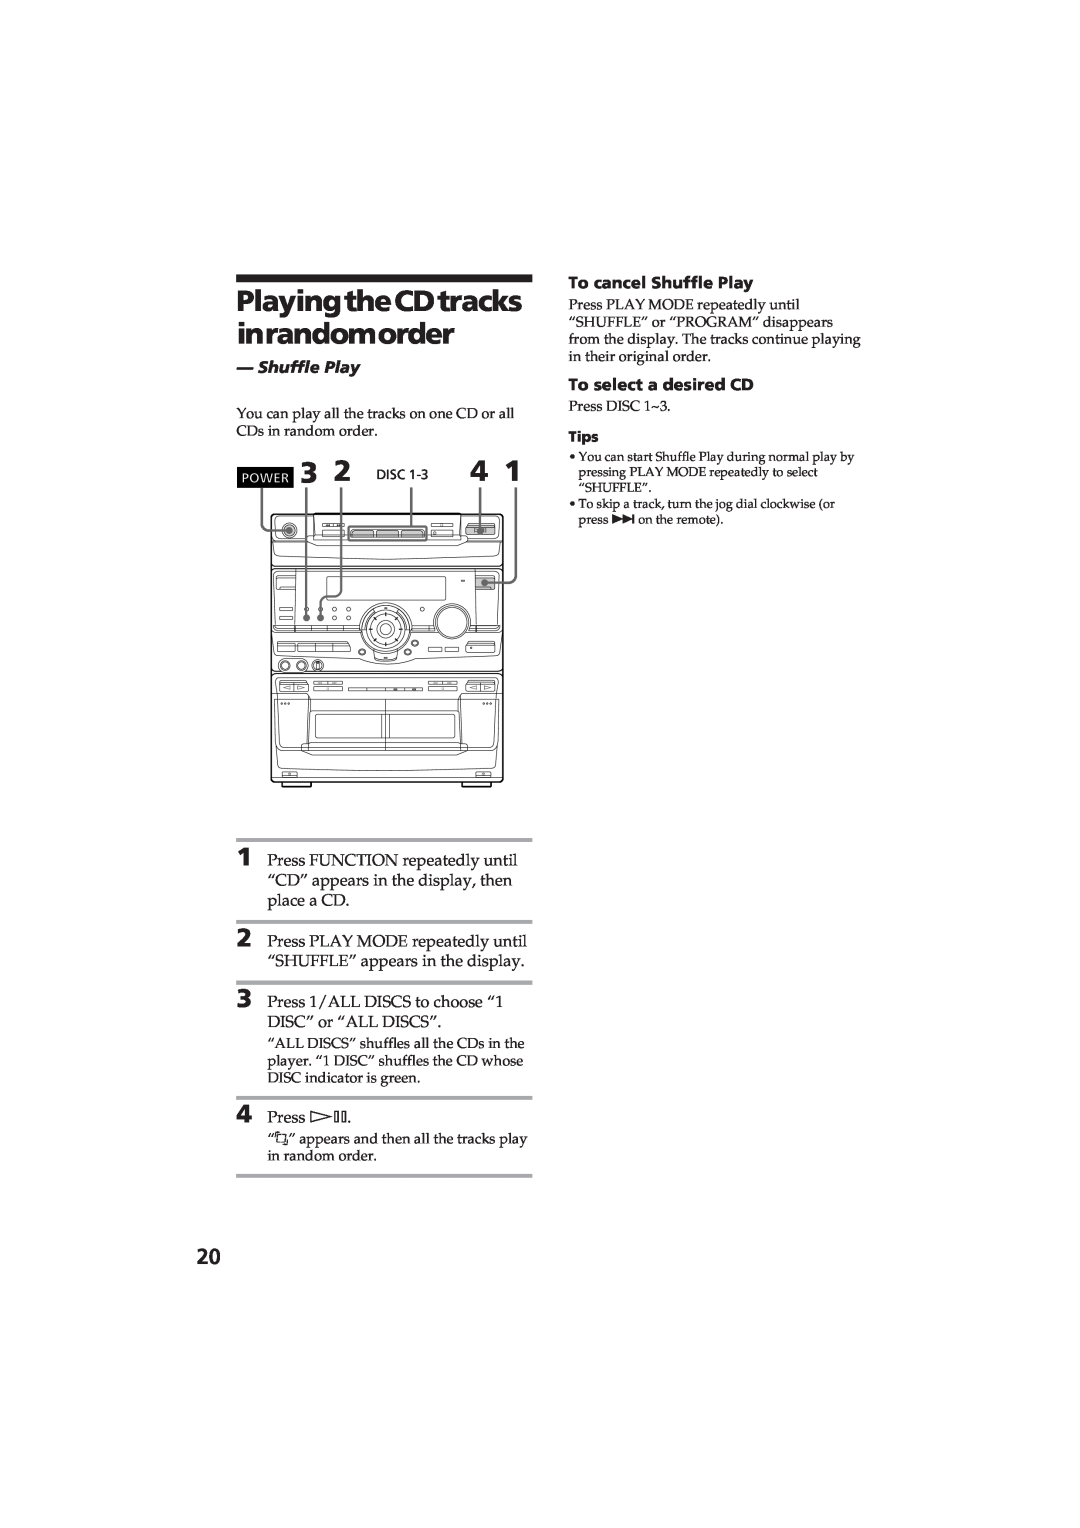 Sony MHC-RX80 manual PlayingtheCDtracks inrandomorder, To cancel Shuffle Play, To select a desired CD 